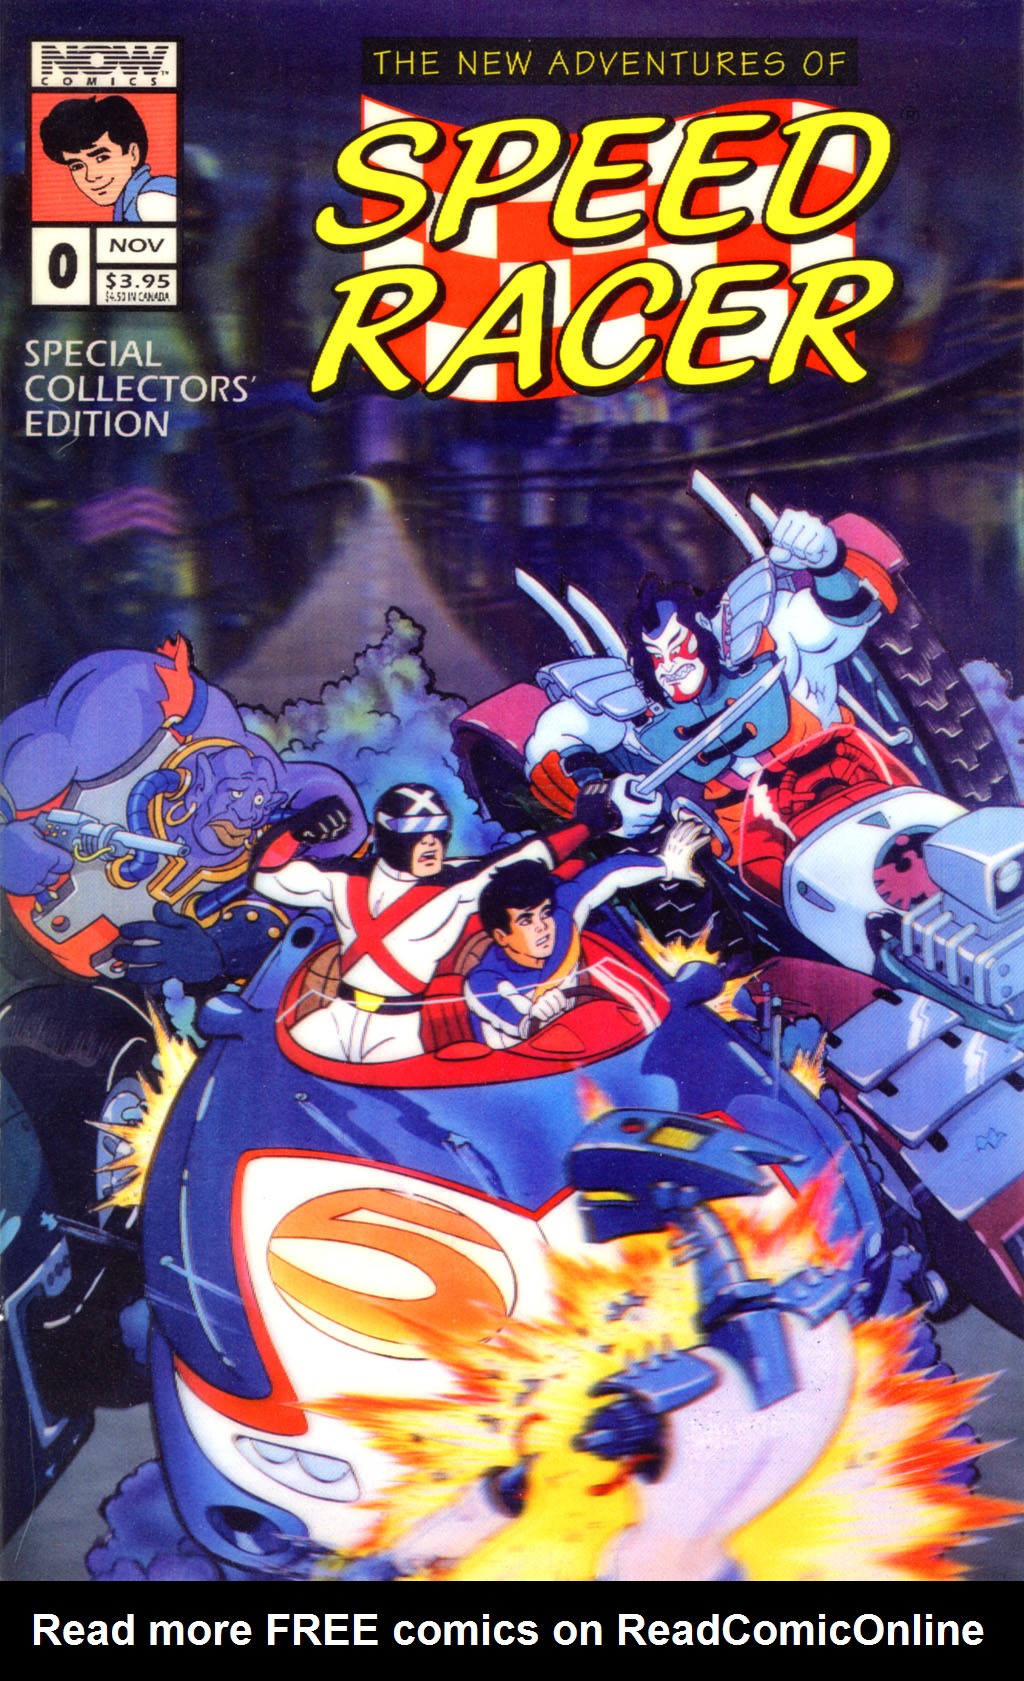 Read online The New Adventures of Speed Racer comic -  Issue #0 - 1